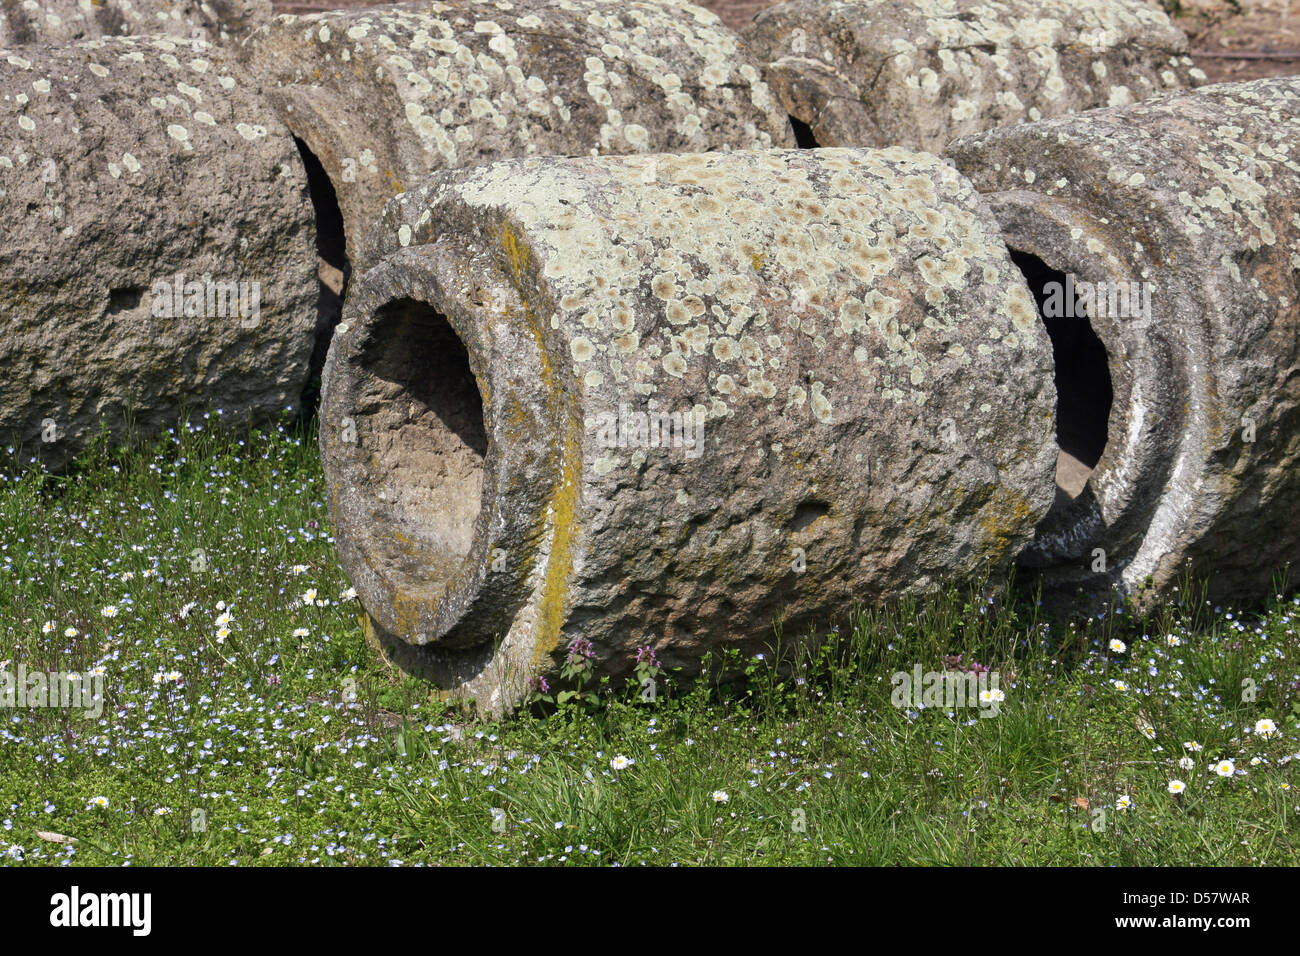 stone and trachyte tubes of an ancient Roman aqueduct historical artifact Stock Photo